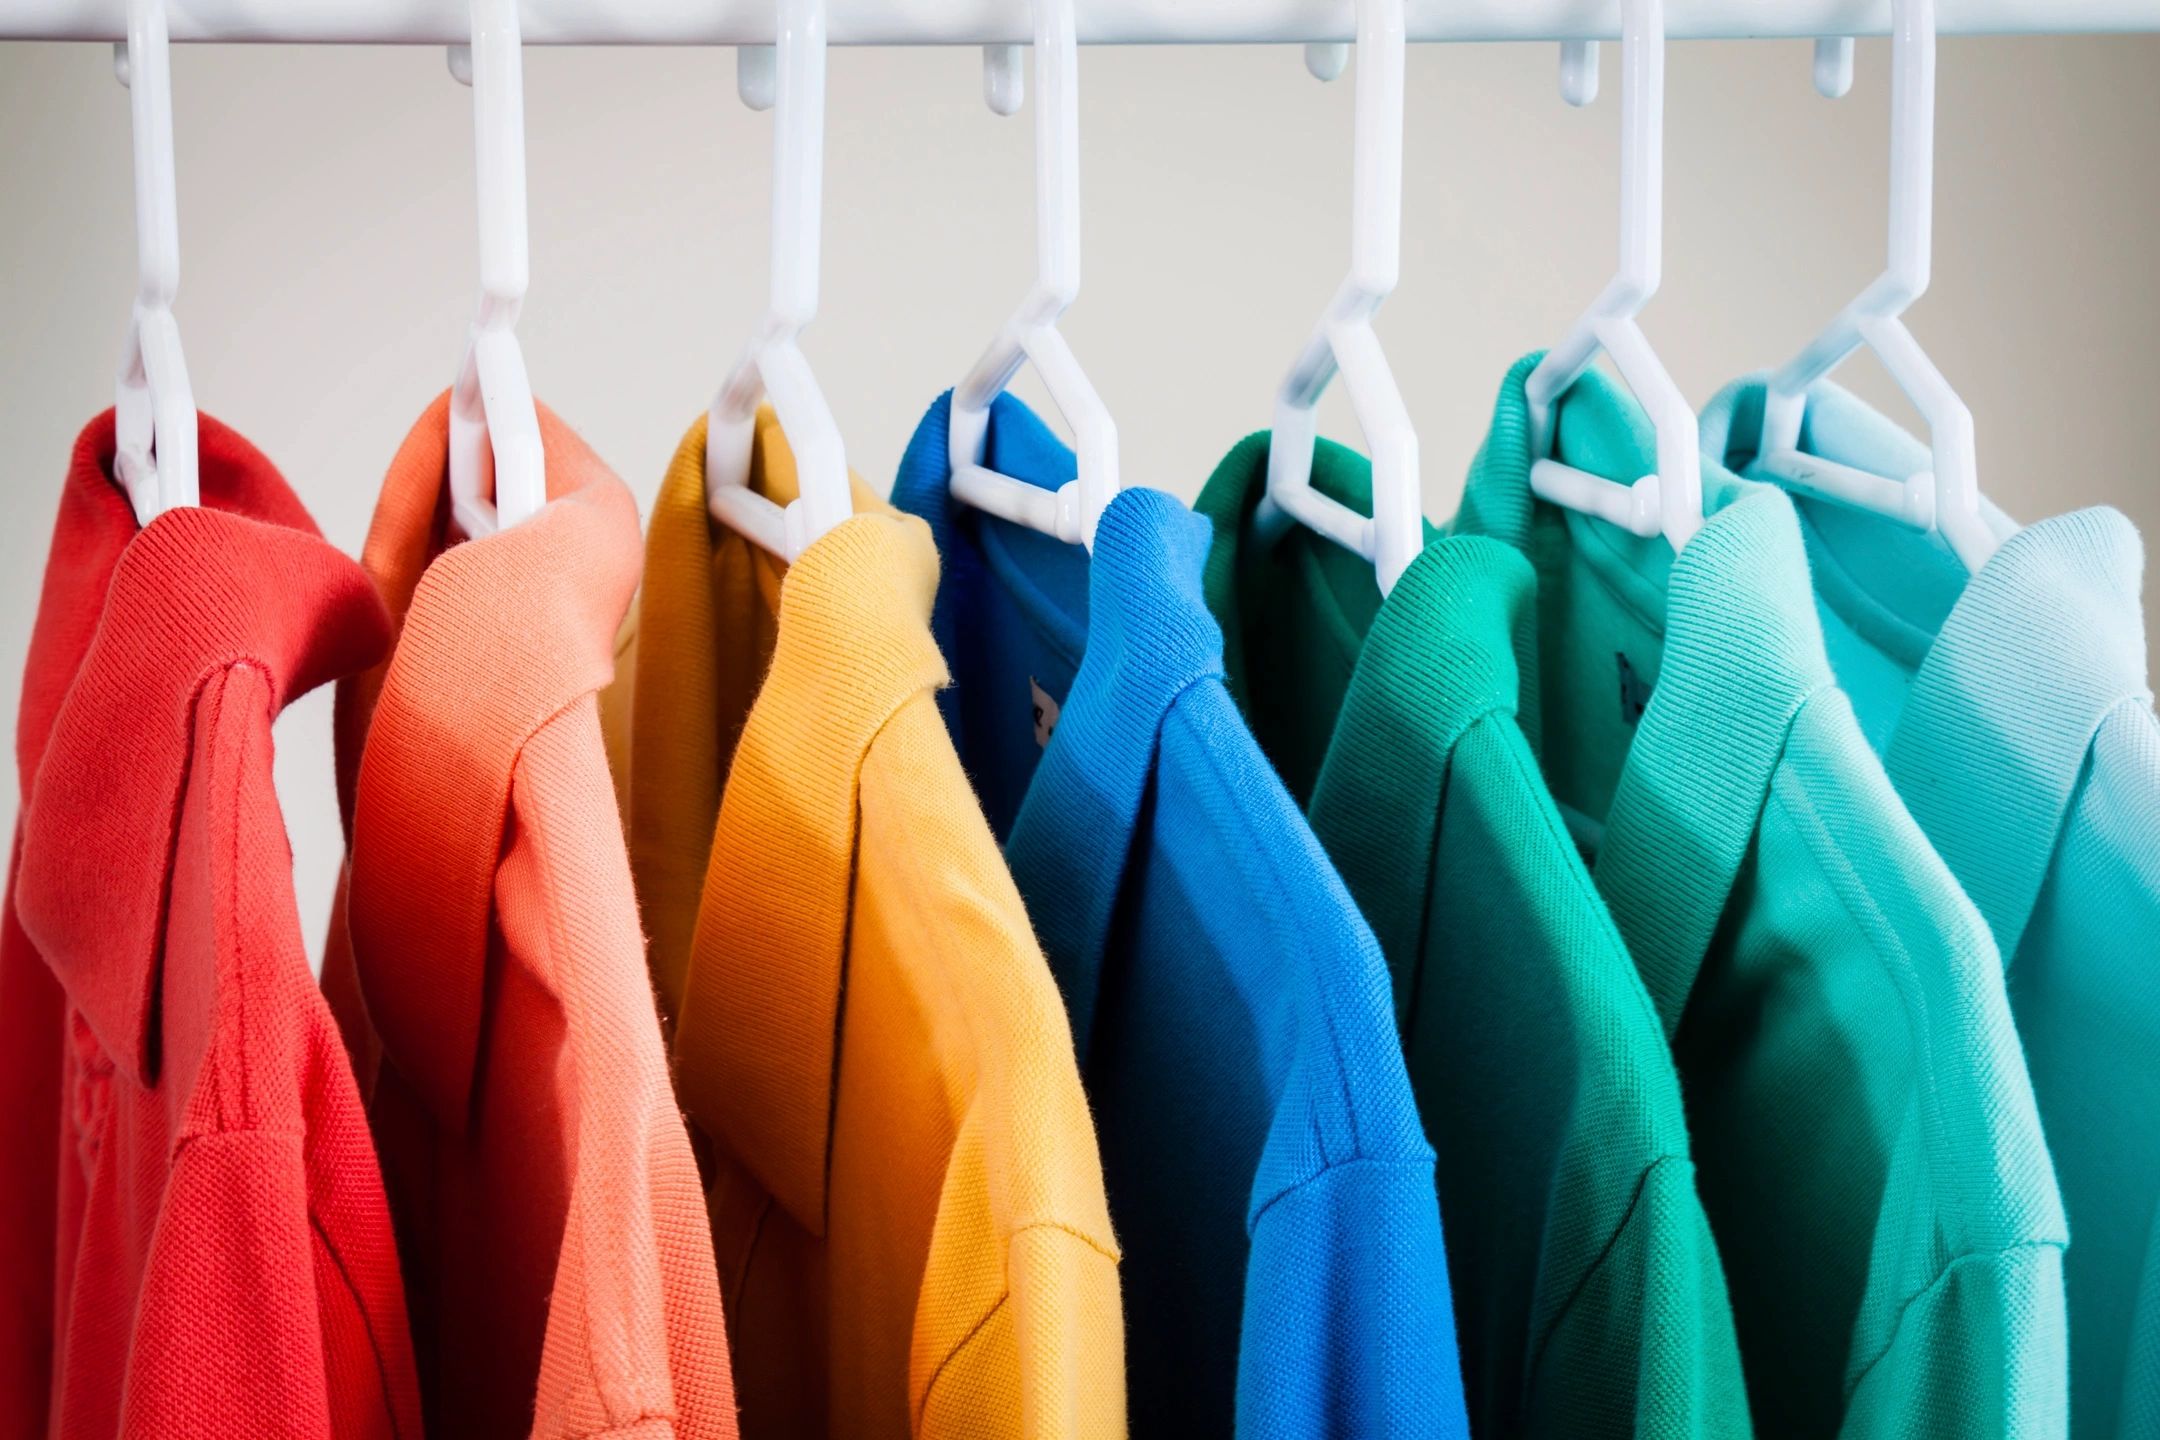 rainbow of shirts, hangers with multiple dry cleaned shirts, white hangers,